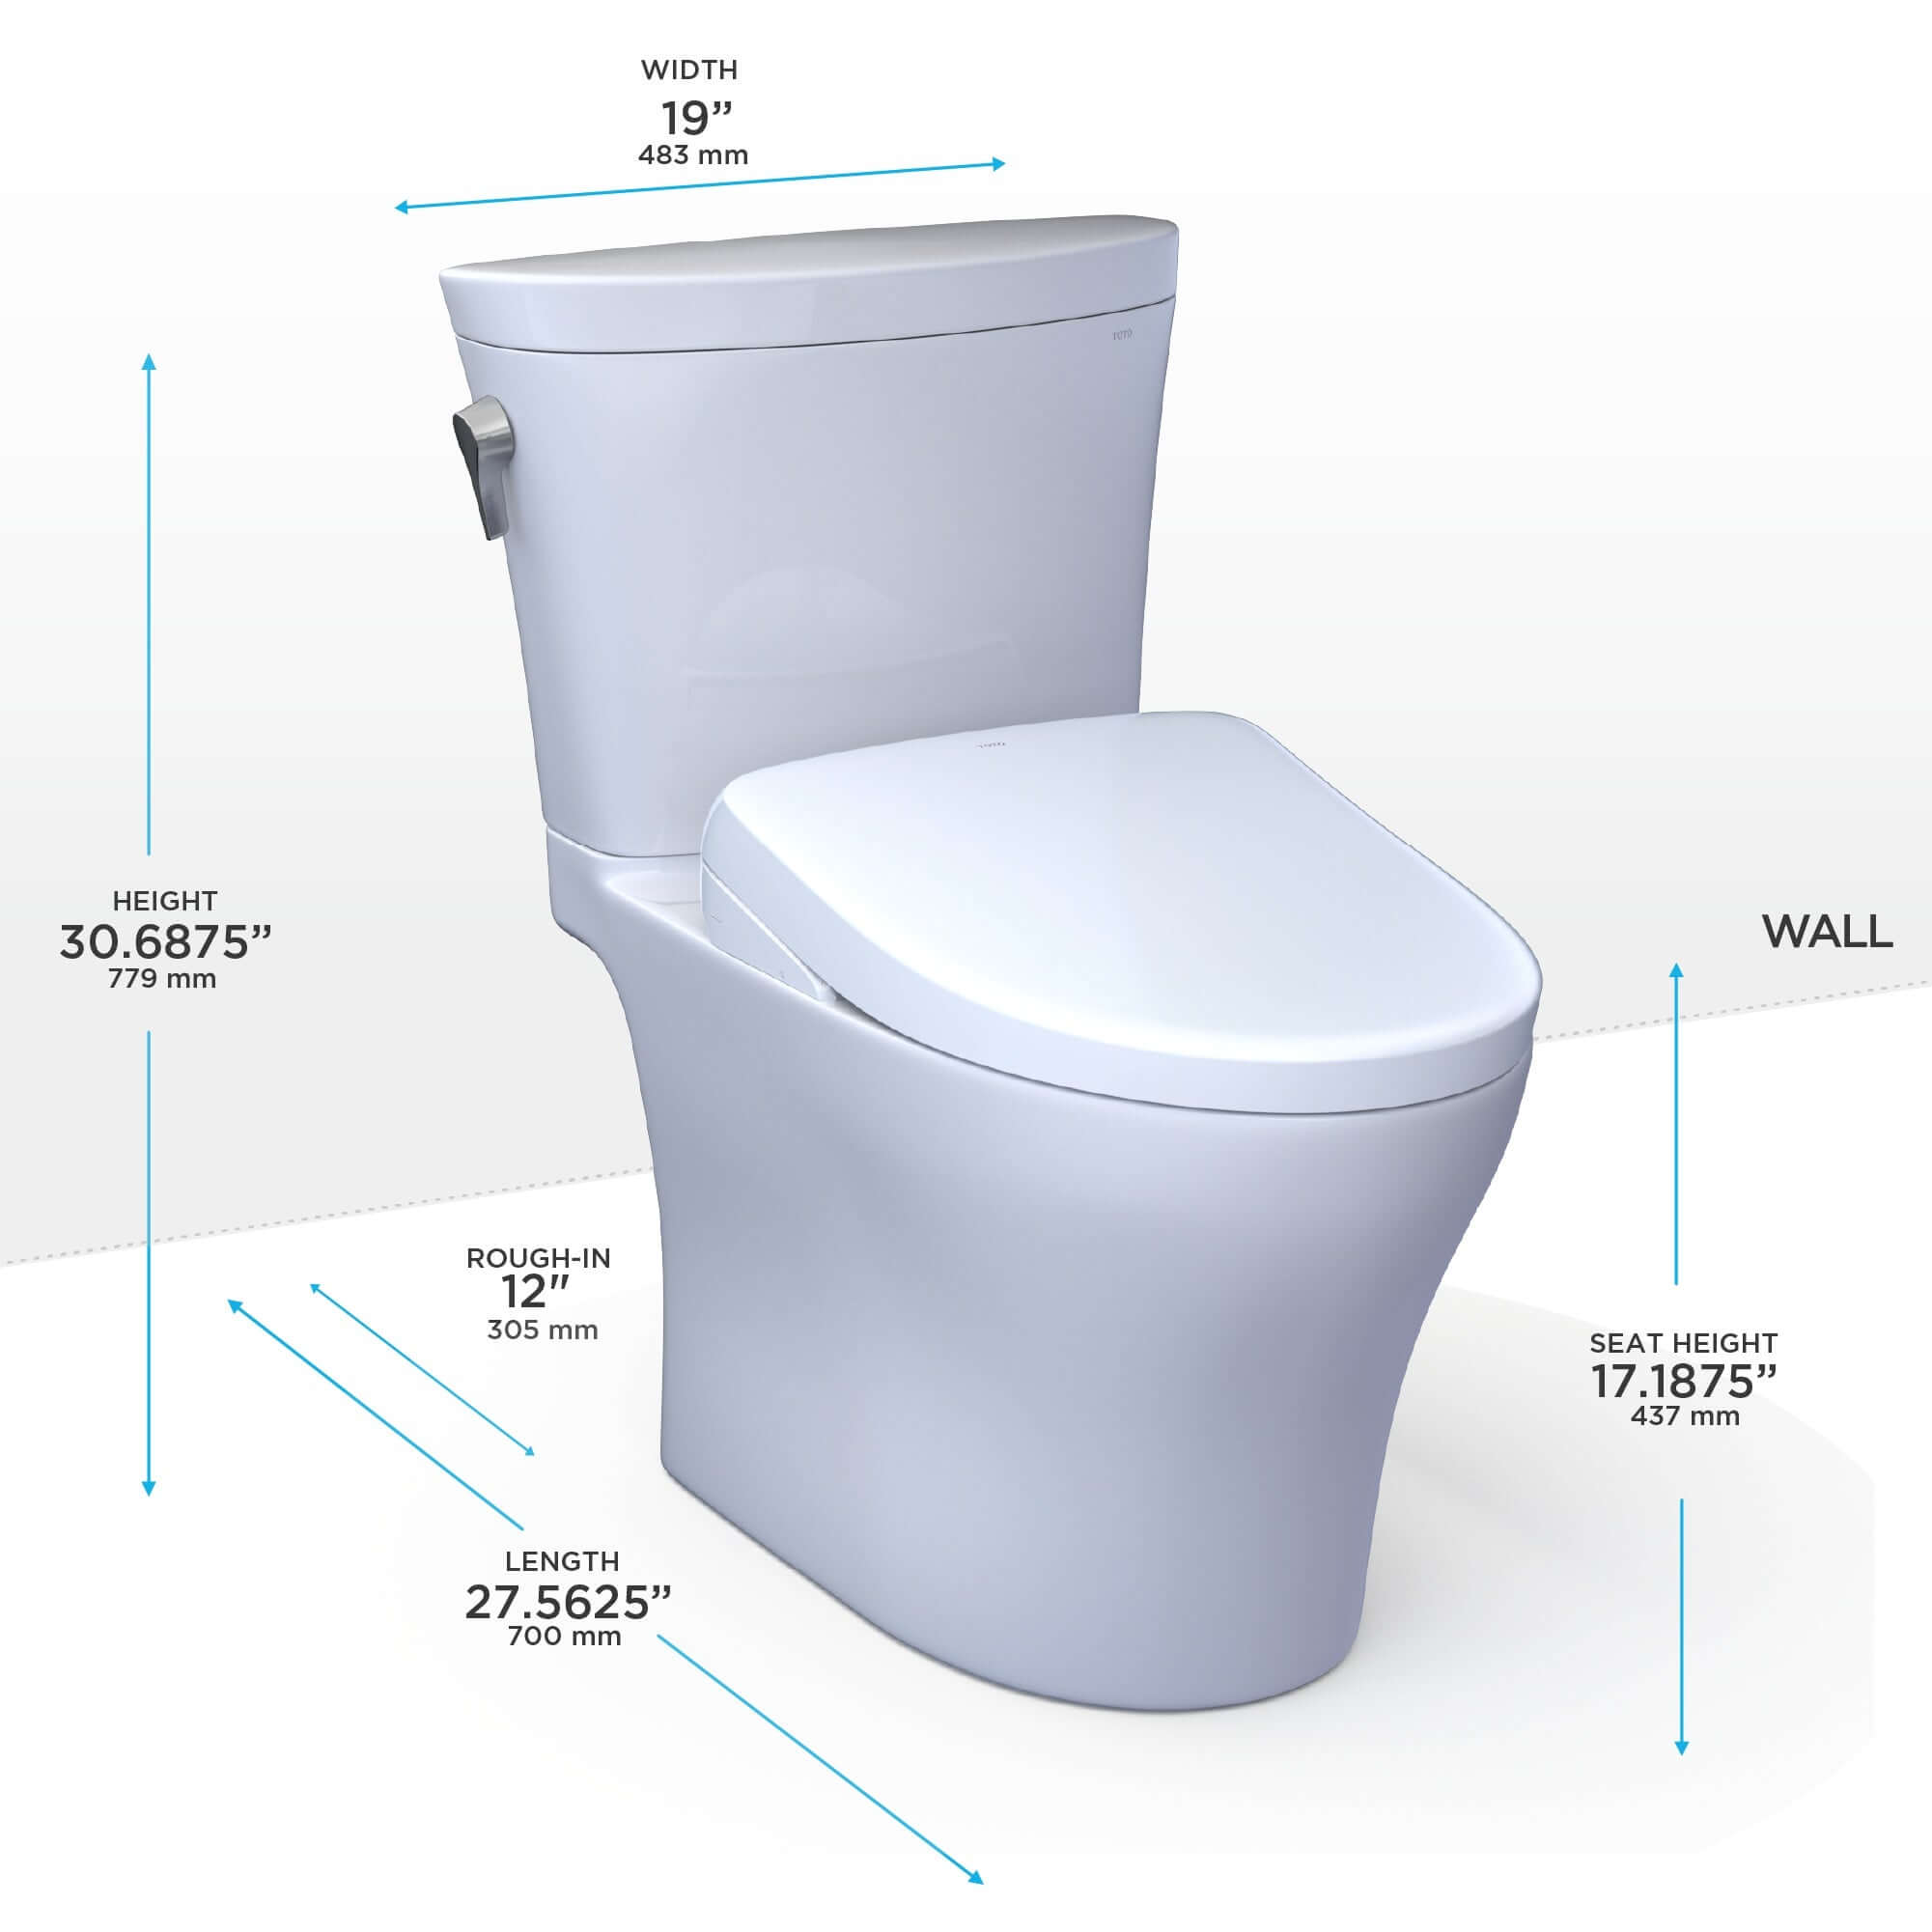 TOTO WASHLET+ Aquia IV ARC Two-Piece Dual Flush 1.28 and 0.9 GPF Toilet with S7 Contemporary Bidet Seat - MW4484726CEMFGN#01